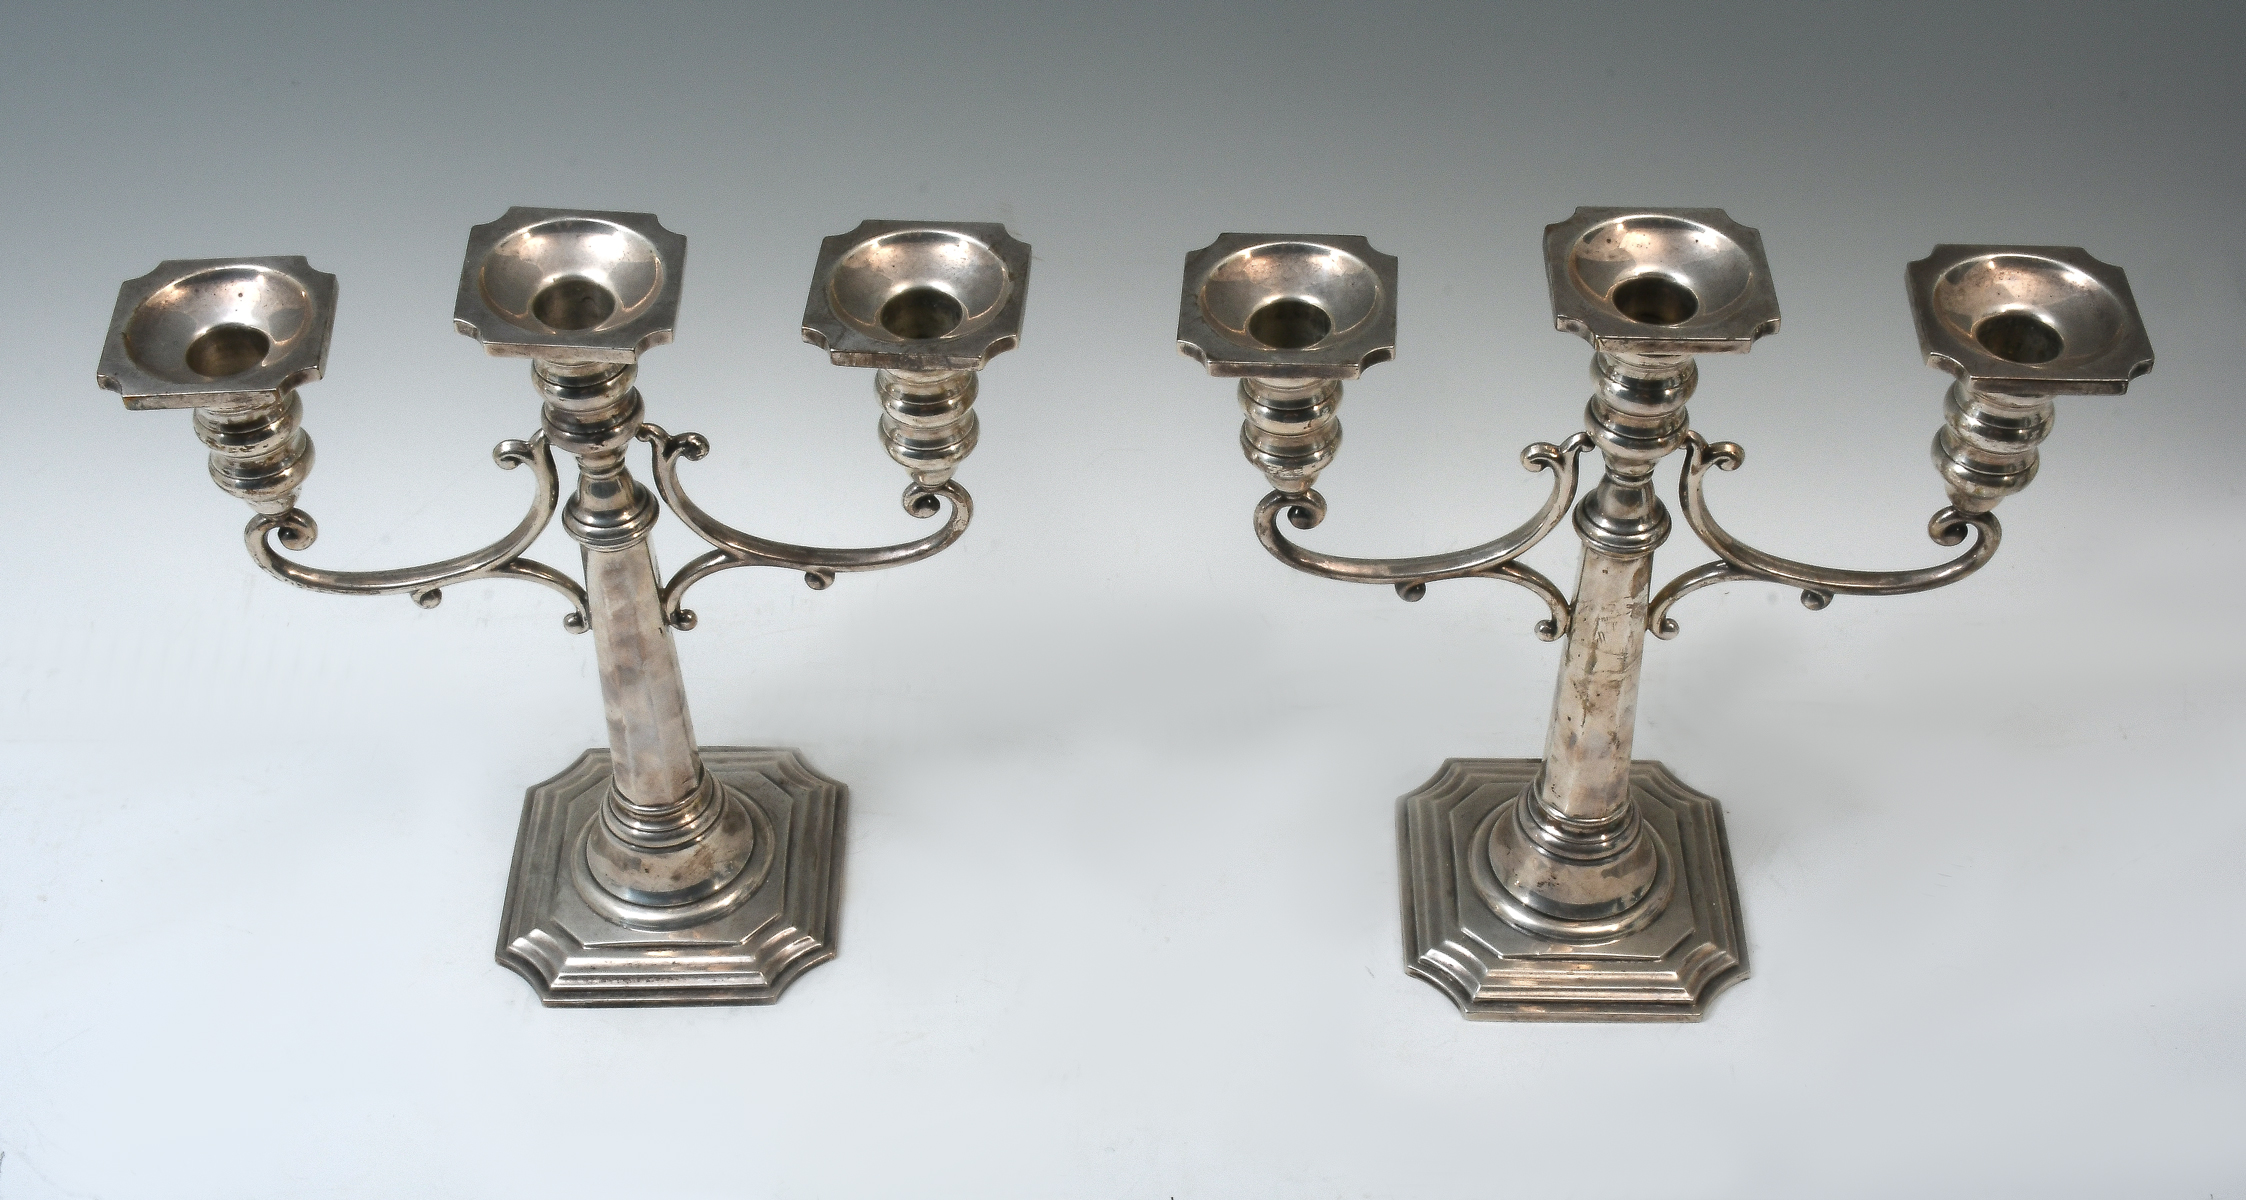 PAIR OF REDLICH & CO. STERLING